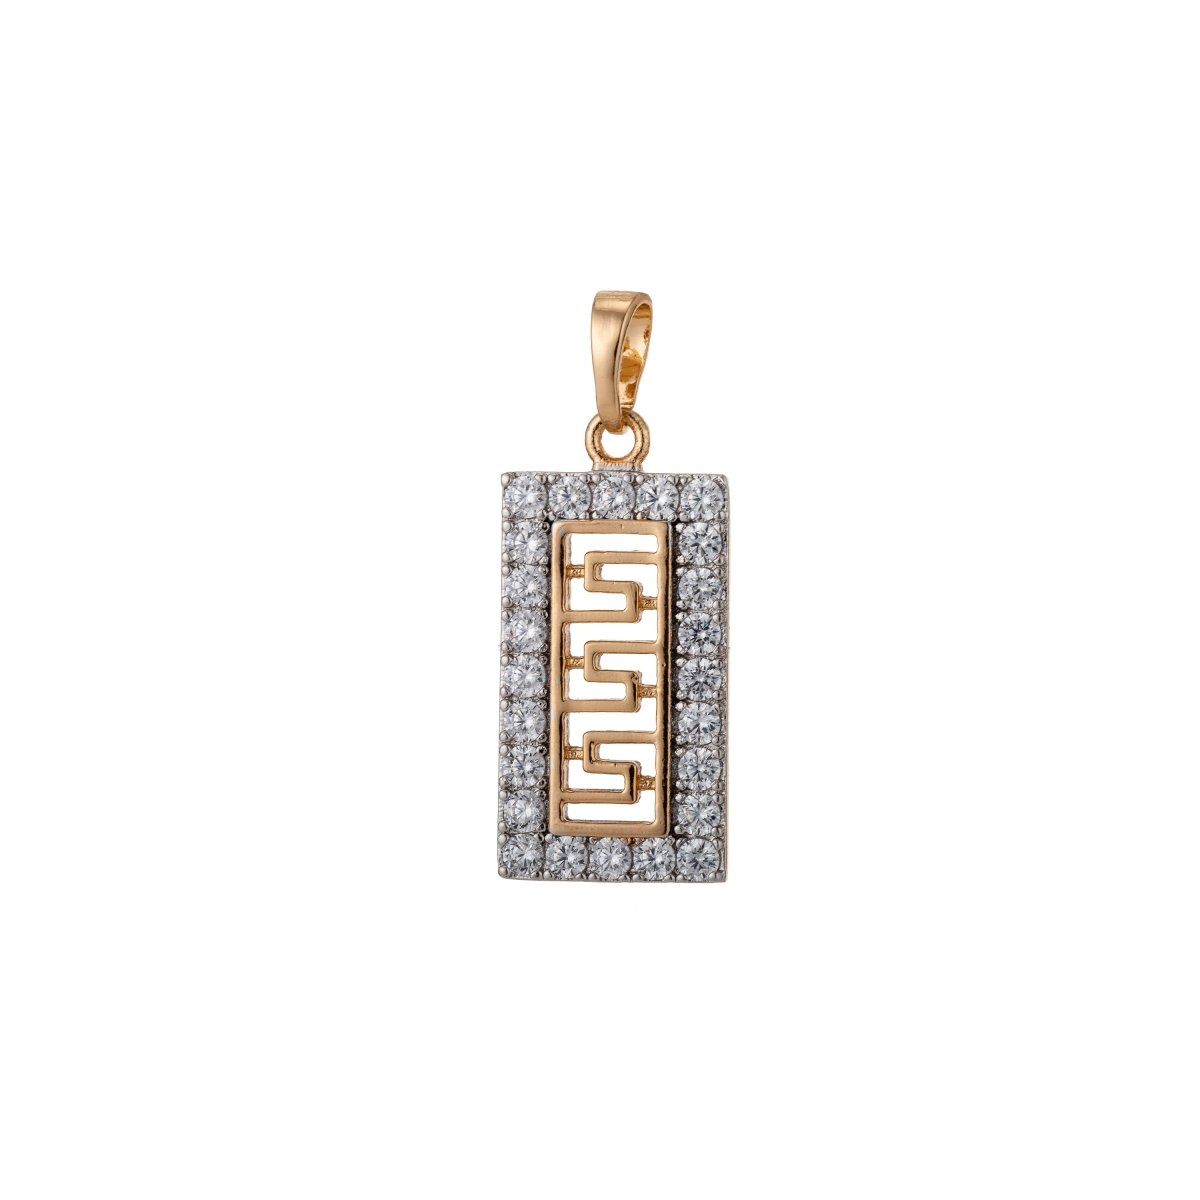 Rectangular CZ Pave 12x29mm Pendant Charm in 18k Gold fill H-819 - DLUXCA